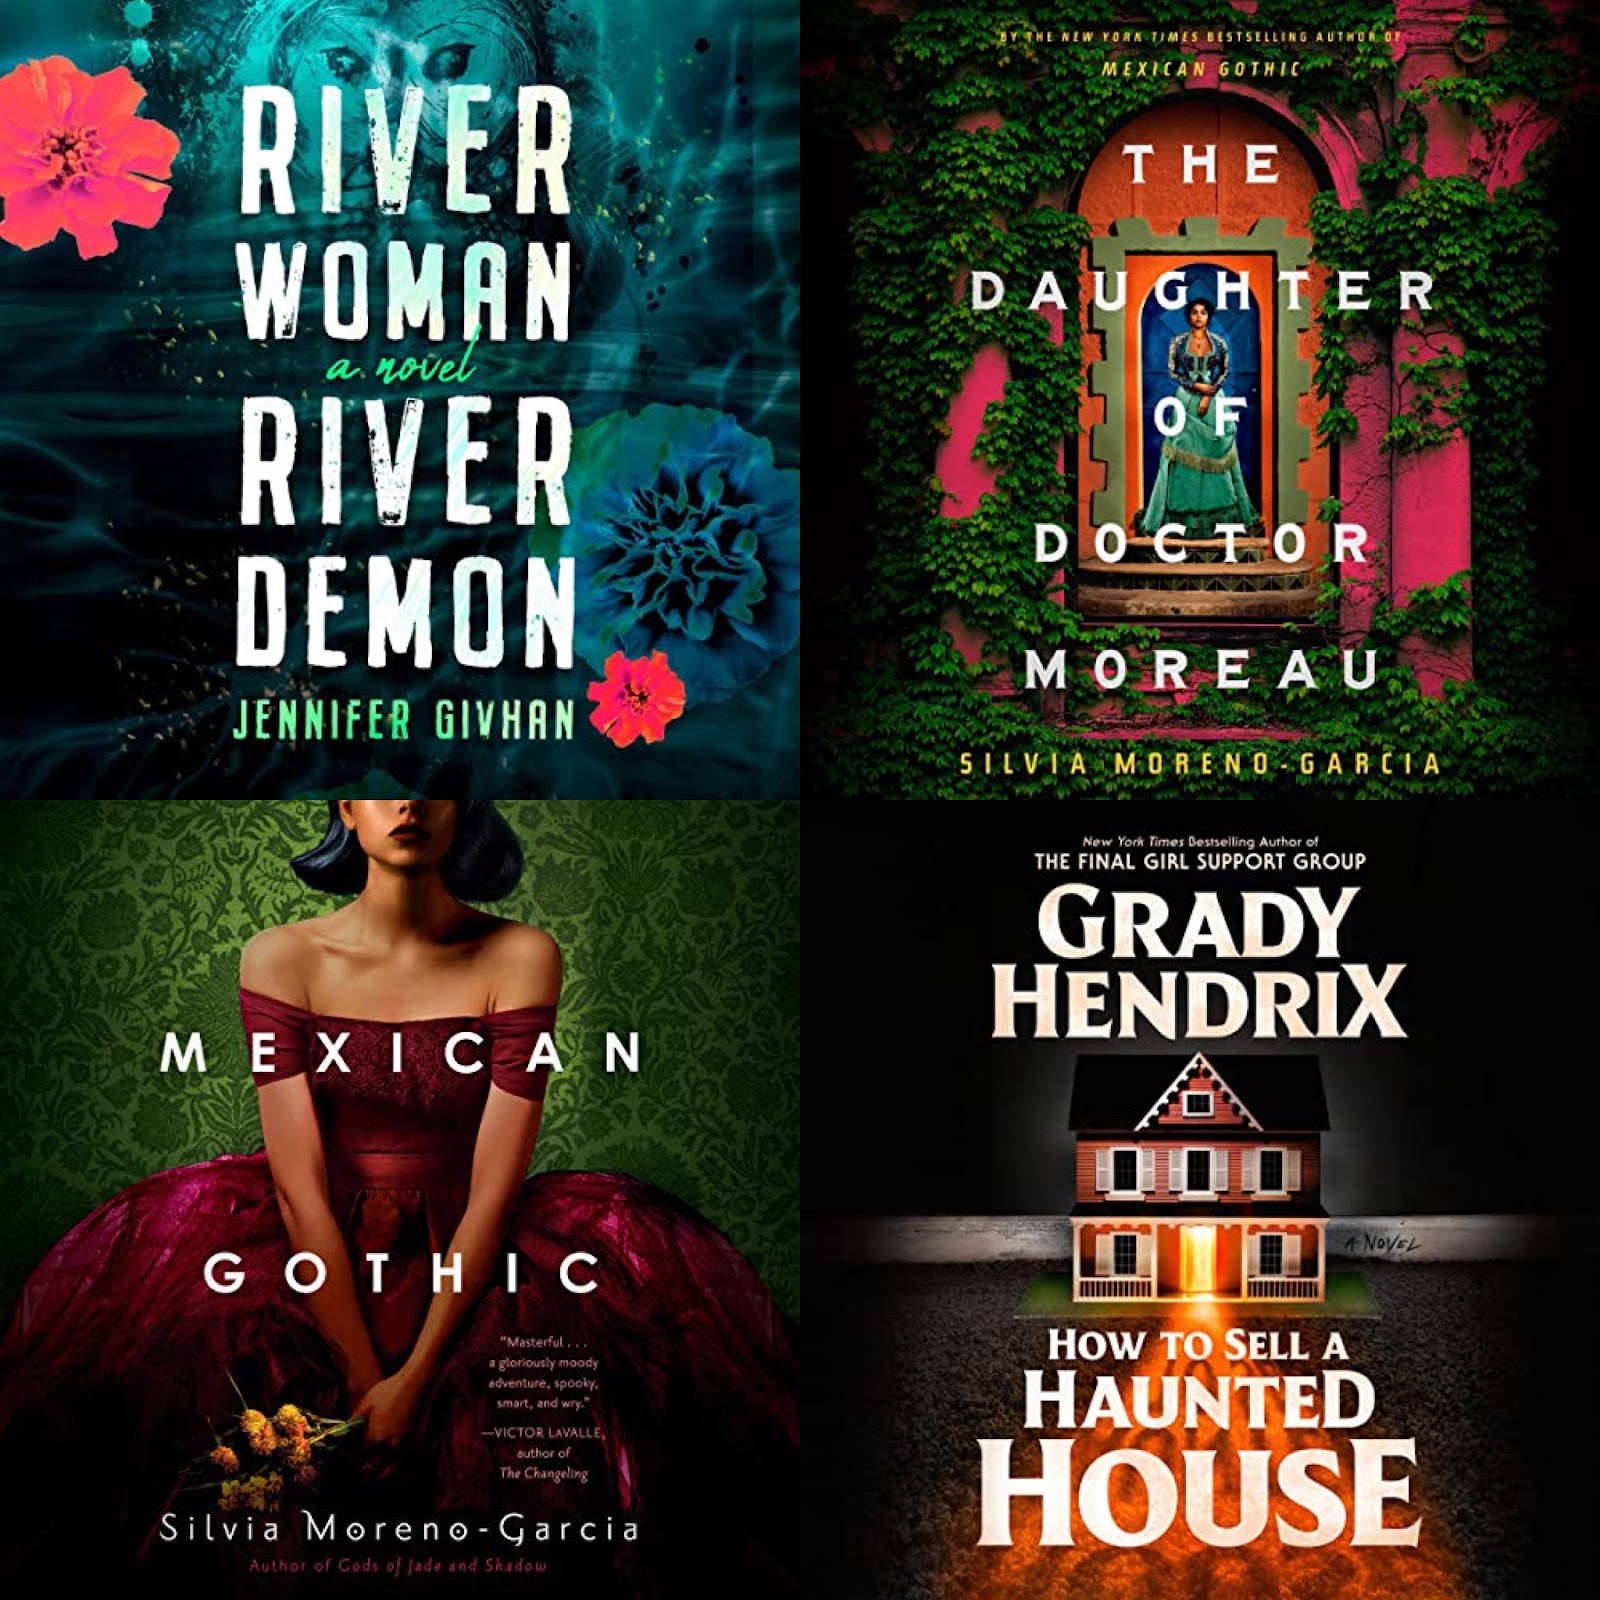 Images of four book covers: RiverWoman, River Demon; The Daughter of Doctor Moreau; Mexican Gothic; How to Sell a Haunted House.